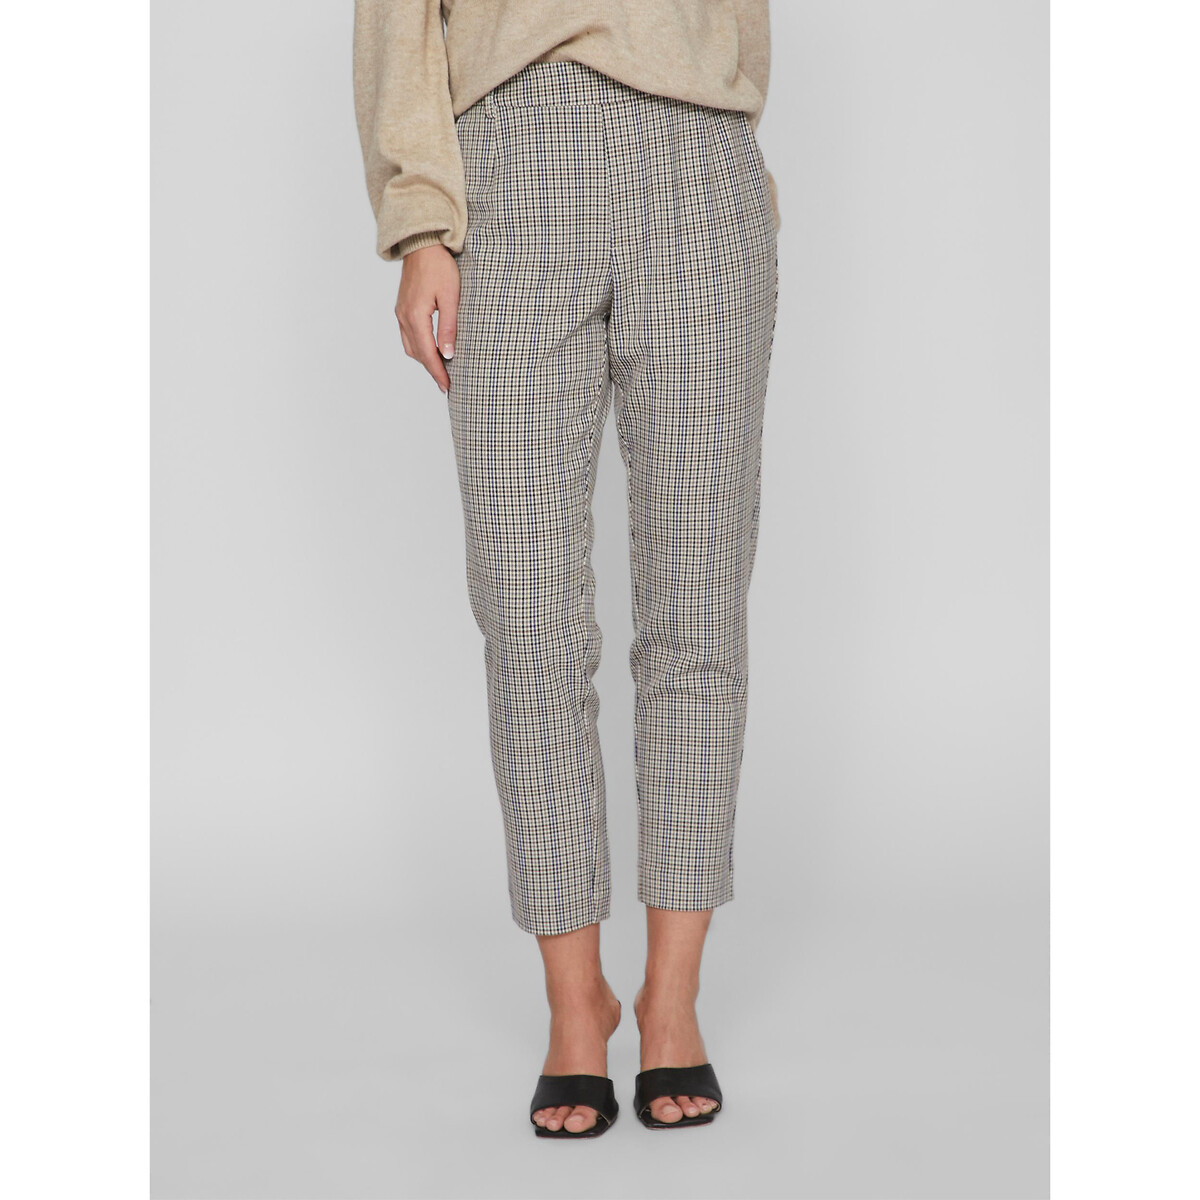 Image of Checked Slim Fit Trousers with High Waist